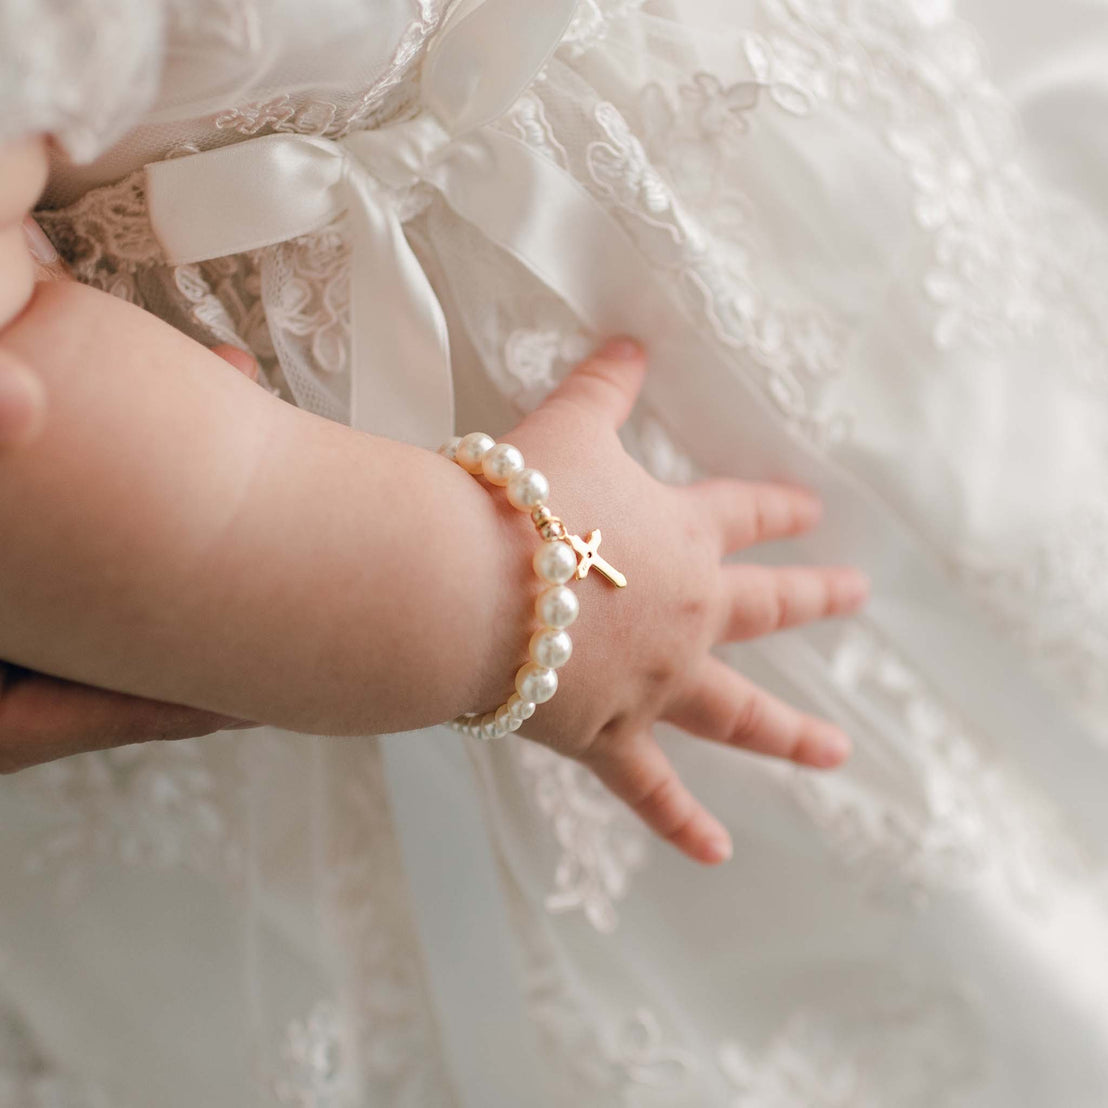 Baby girl wearing the Cream Luster Pearl Bracelet with Gold Cross. Made with cream color Swarvoski pearls, gold plated beads and gold plated clasp.